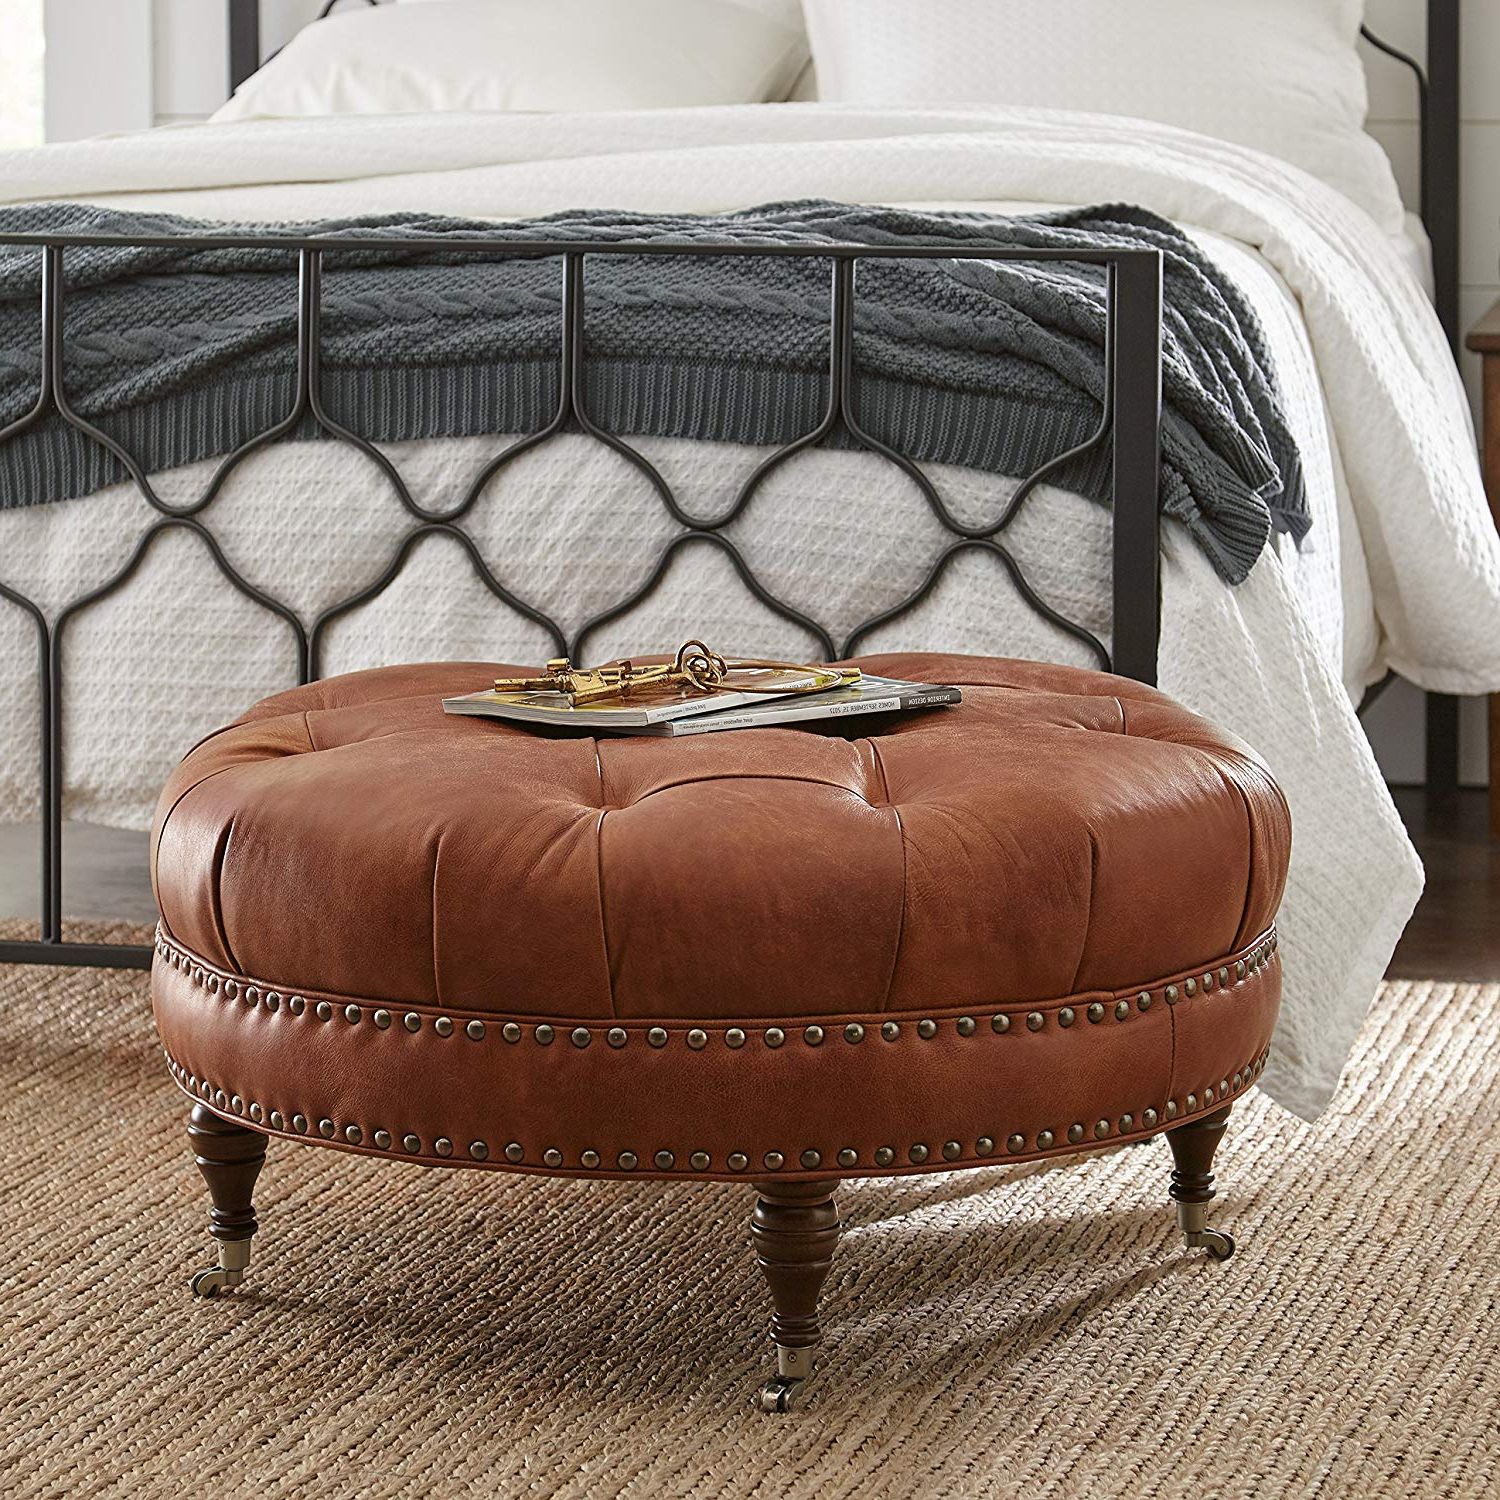 Most Popular Button Tufted Round Leather Wheeled Ottoman With Spindled Wooden Legs Intended For Leather Pouf Ottomans (View 6 of 10)